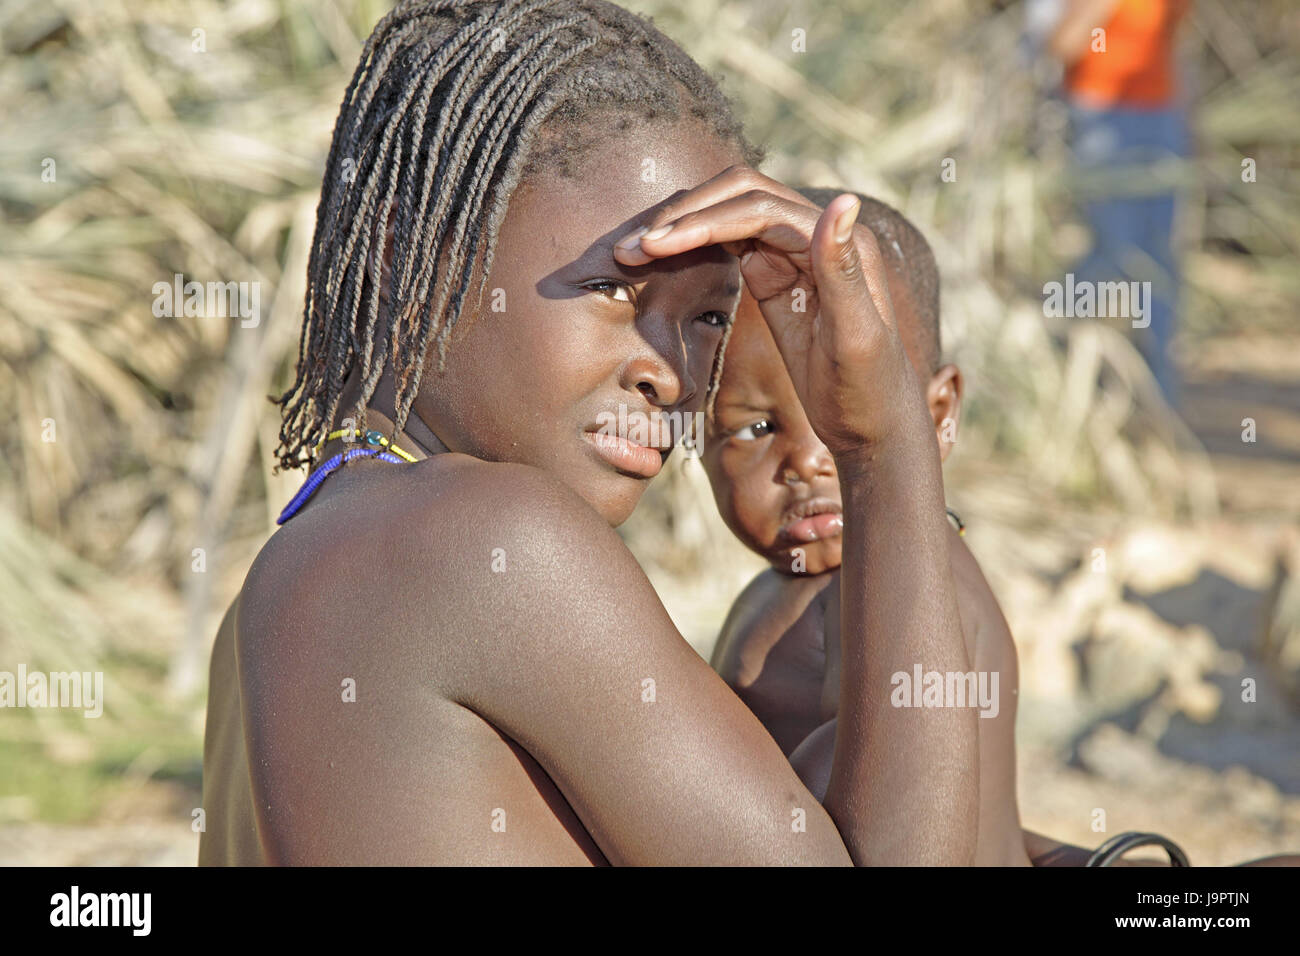 Namibia,Kaokoveld,Himba girl,baby,gesture,the sun,fade out,portrait,Africa,person,African,non-whites,girls,seriously,child,Himba strain,half nomad,Himba,tribe,infant,young persons,plaits,skin colour, Stock Photo